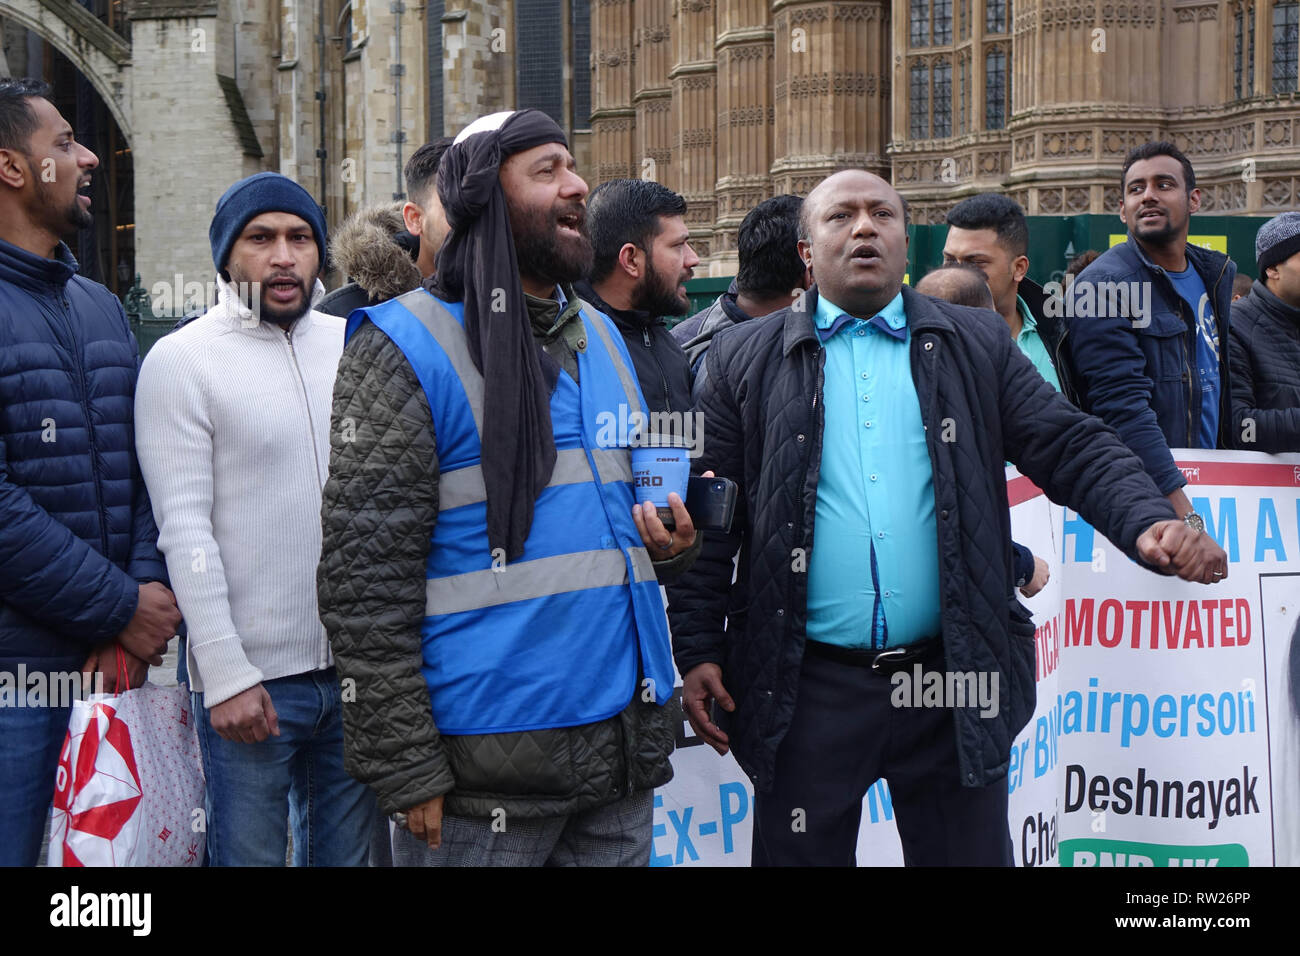 Westminster, London, UK, 4th of March 2019. Members and activists of the Bangladesh Nationalist Party (BNP) protest for the release of three-time former Prime Minister Khaleda Zia. BNP Chairperson Khaleda Zia's elder son and also party's Acting Chairman, Tarique Rahman, is currently living in London, and successfully applied for political asylum in the UK in 2008. Credit: Thomas Krych/Alamy Live News Stock Photo